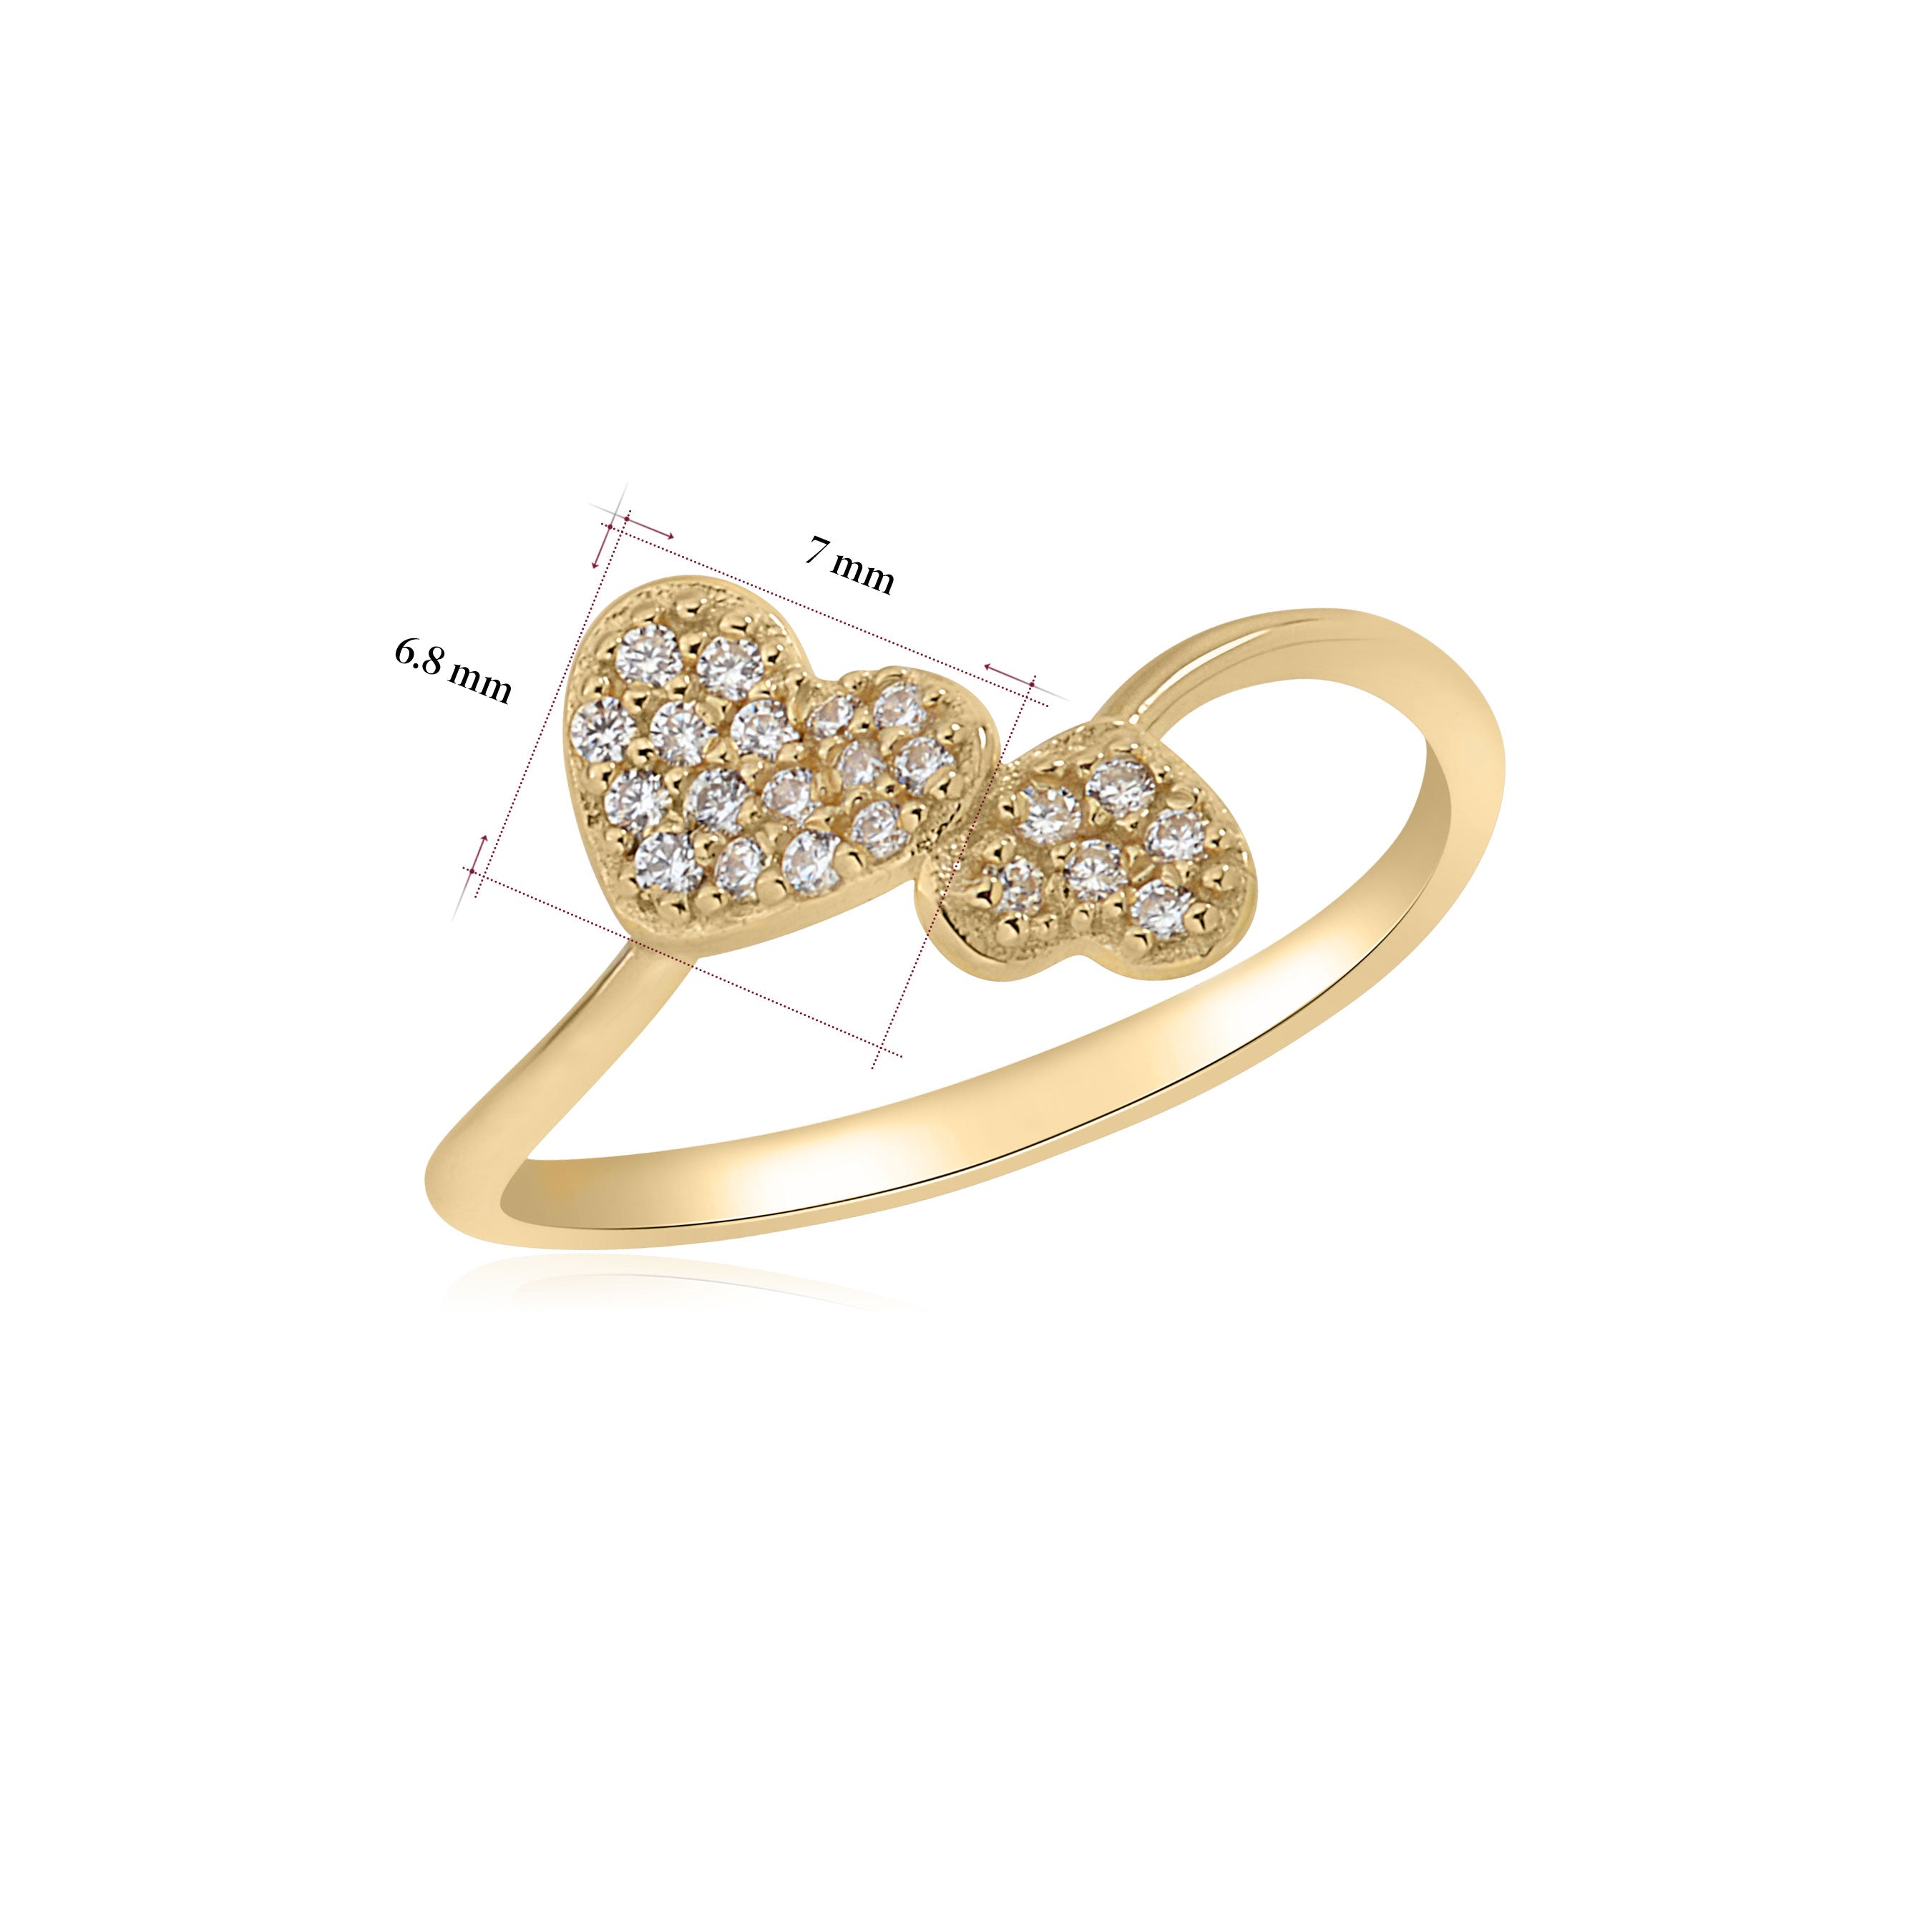 UNICORNJ 14K Yellow Gold Double Heart Pave CZ Bypass Ring Italy